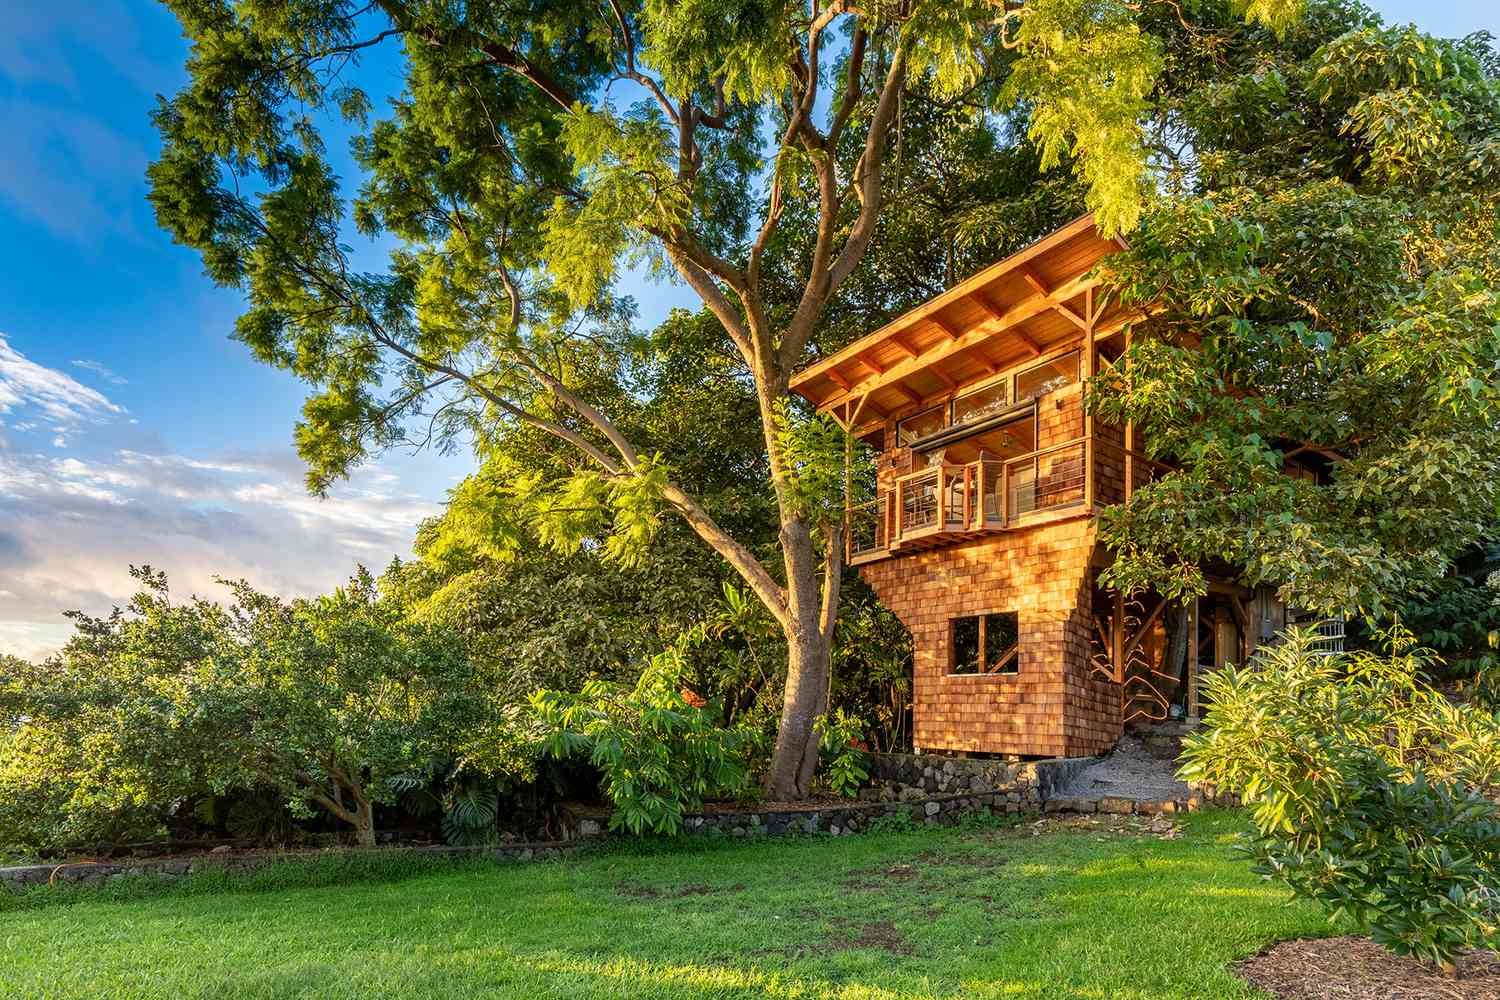 24 Magical Tree House Airbnbs You Can Stay in Around the World